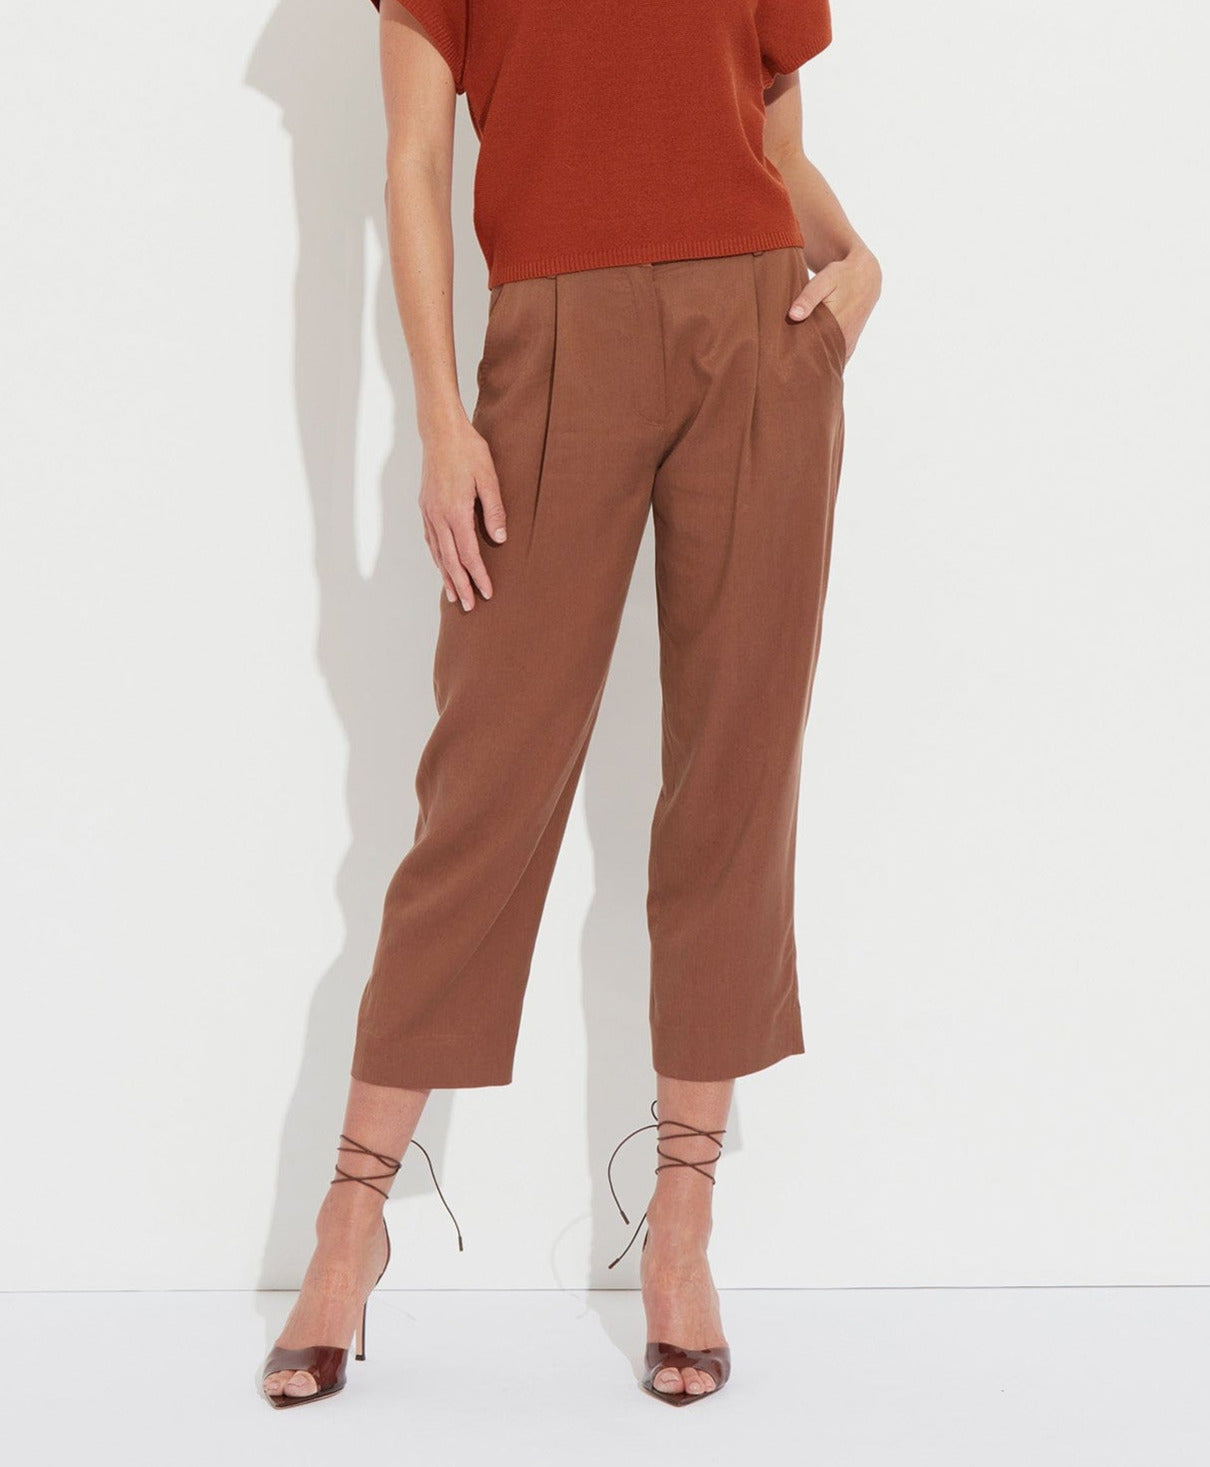 9 Sophisticated Womens Trousers Styles for AutumnWinter 202324   Alibabacom Reads